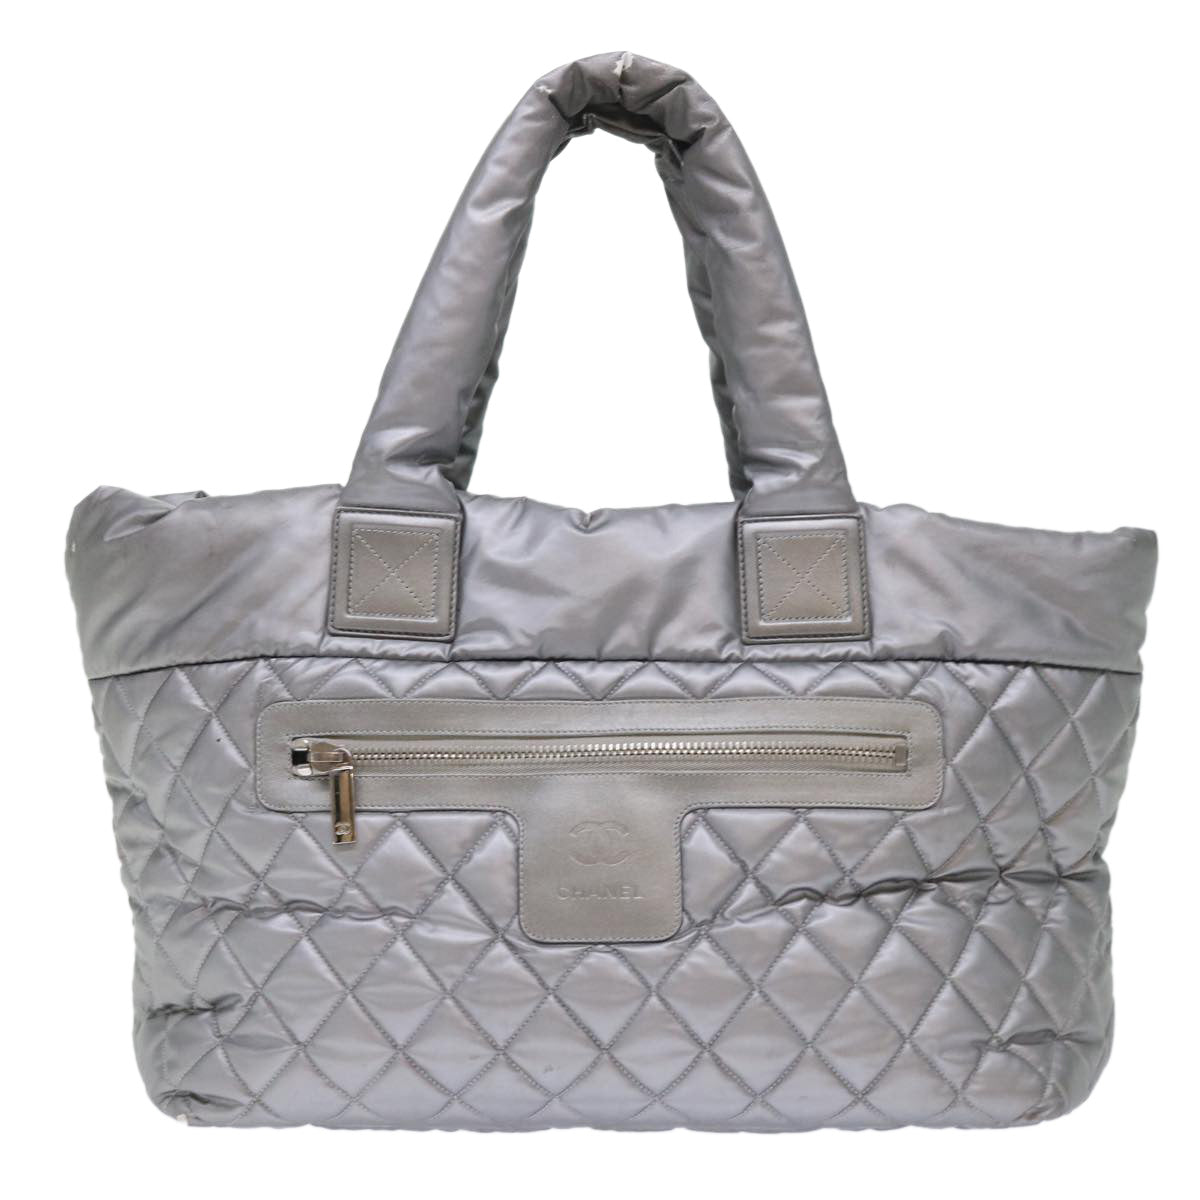 CHANEL Cococoon Hand Bag Nylon Silver CC Auth bs7271